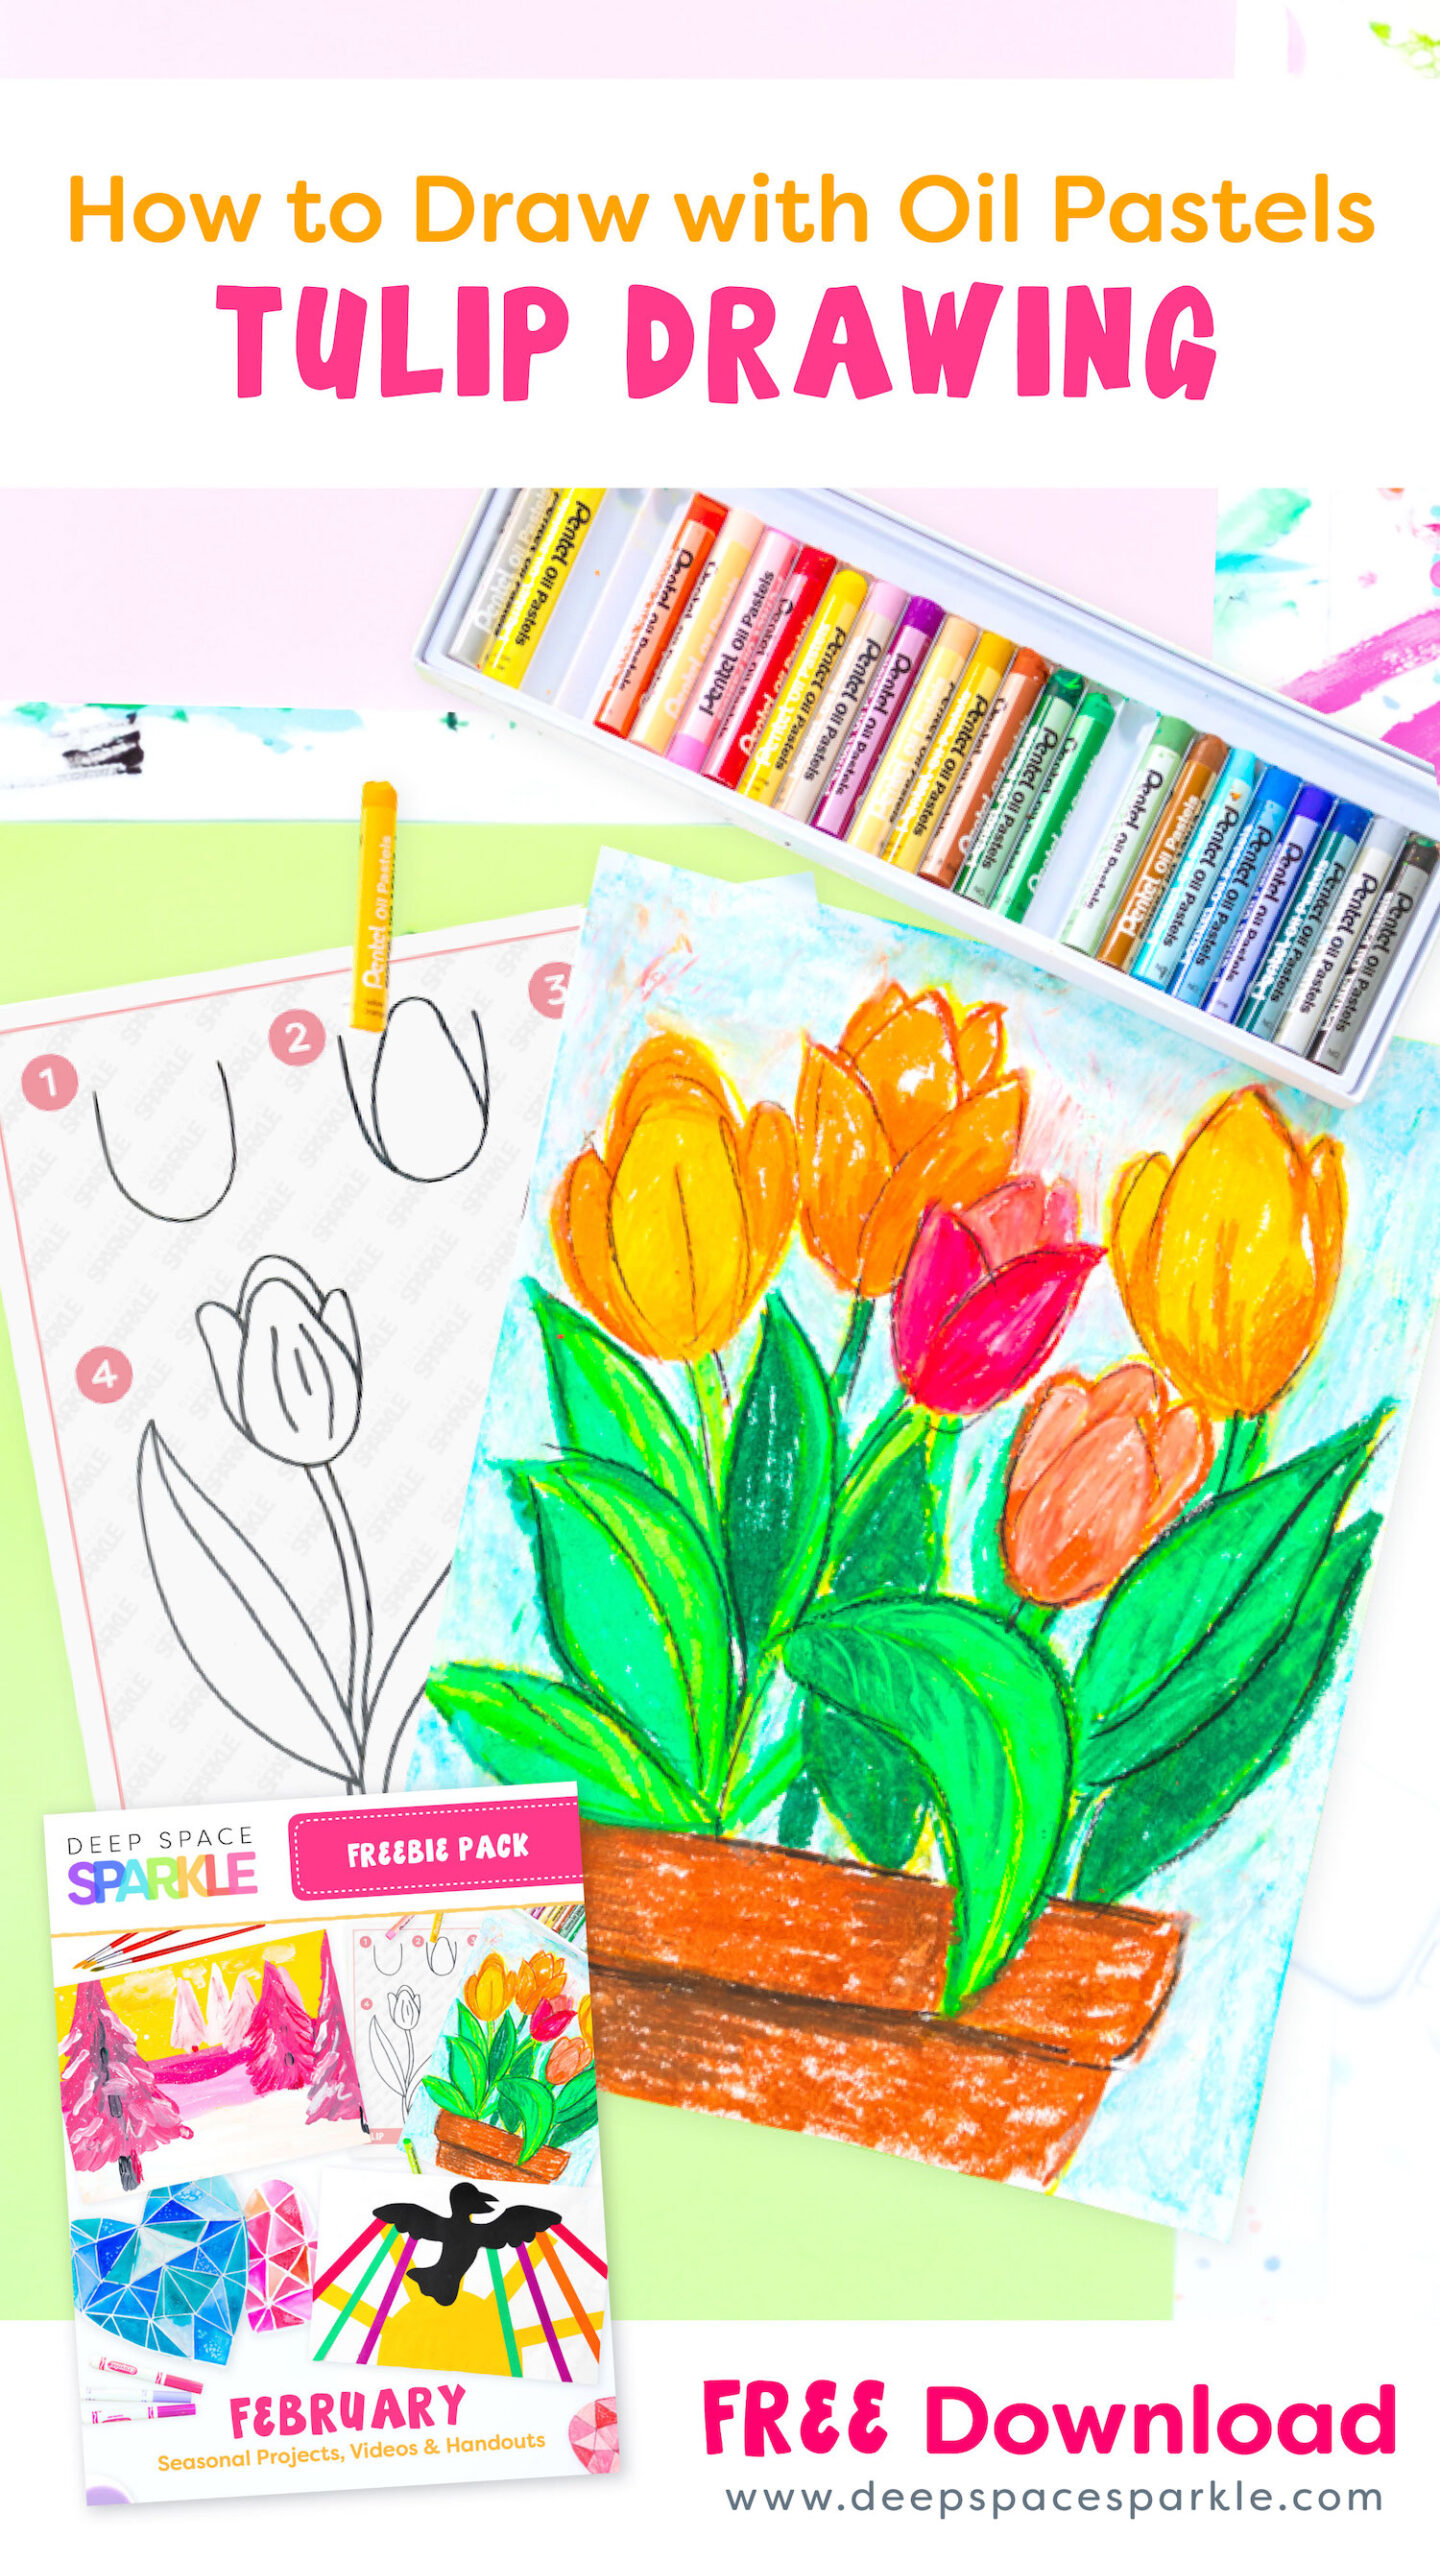 How to draw tulips art project with free download